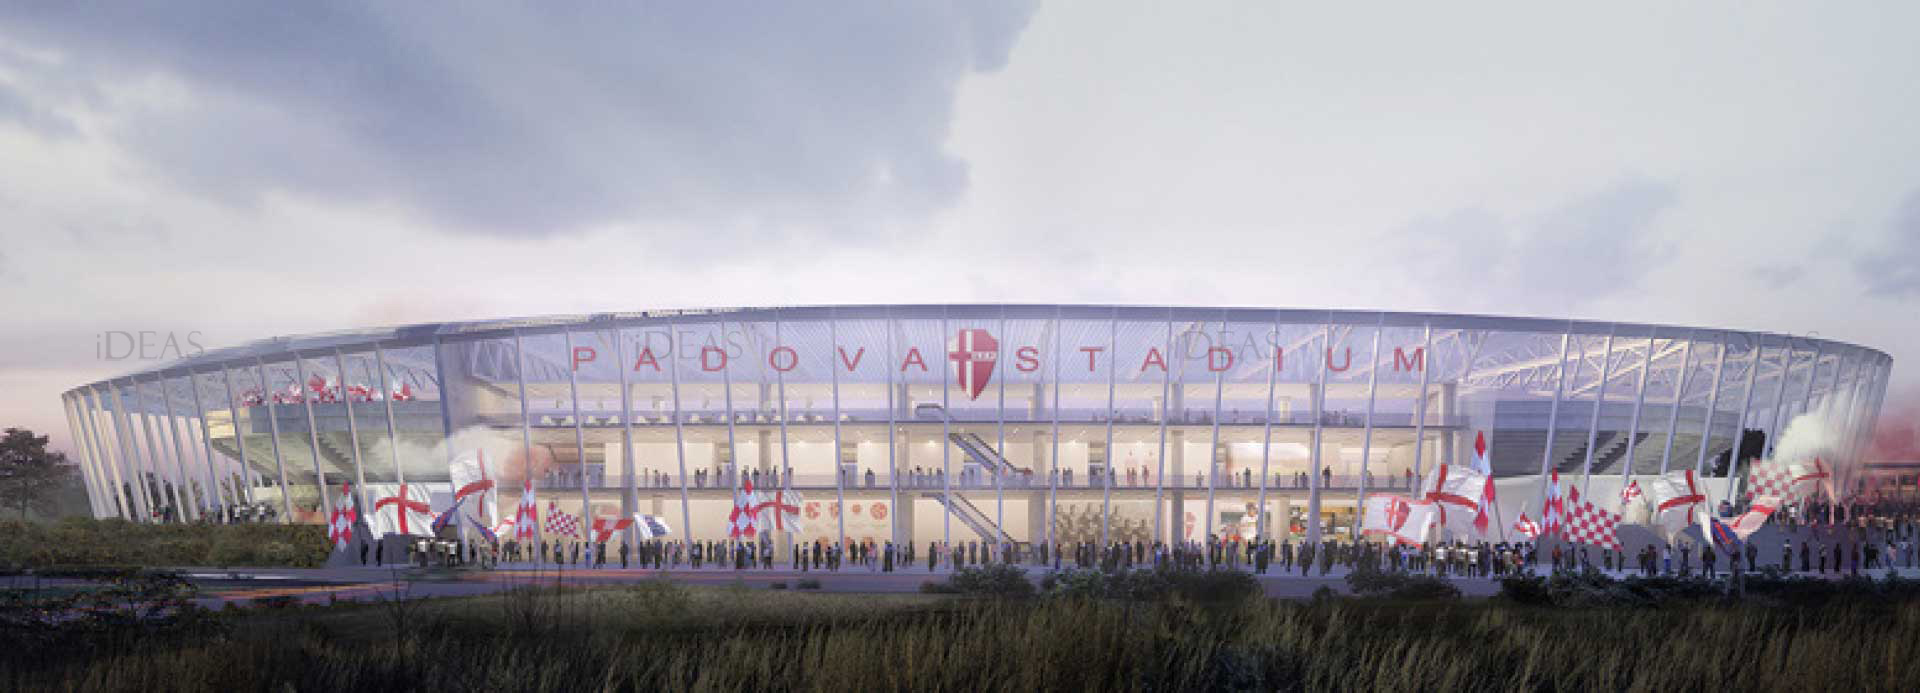 padova stadium front view structural engineering